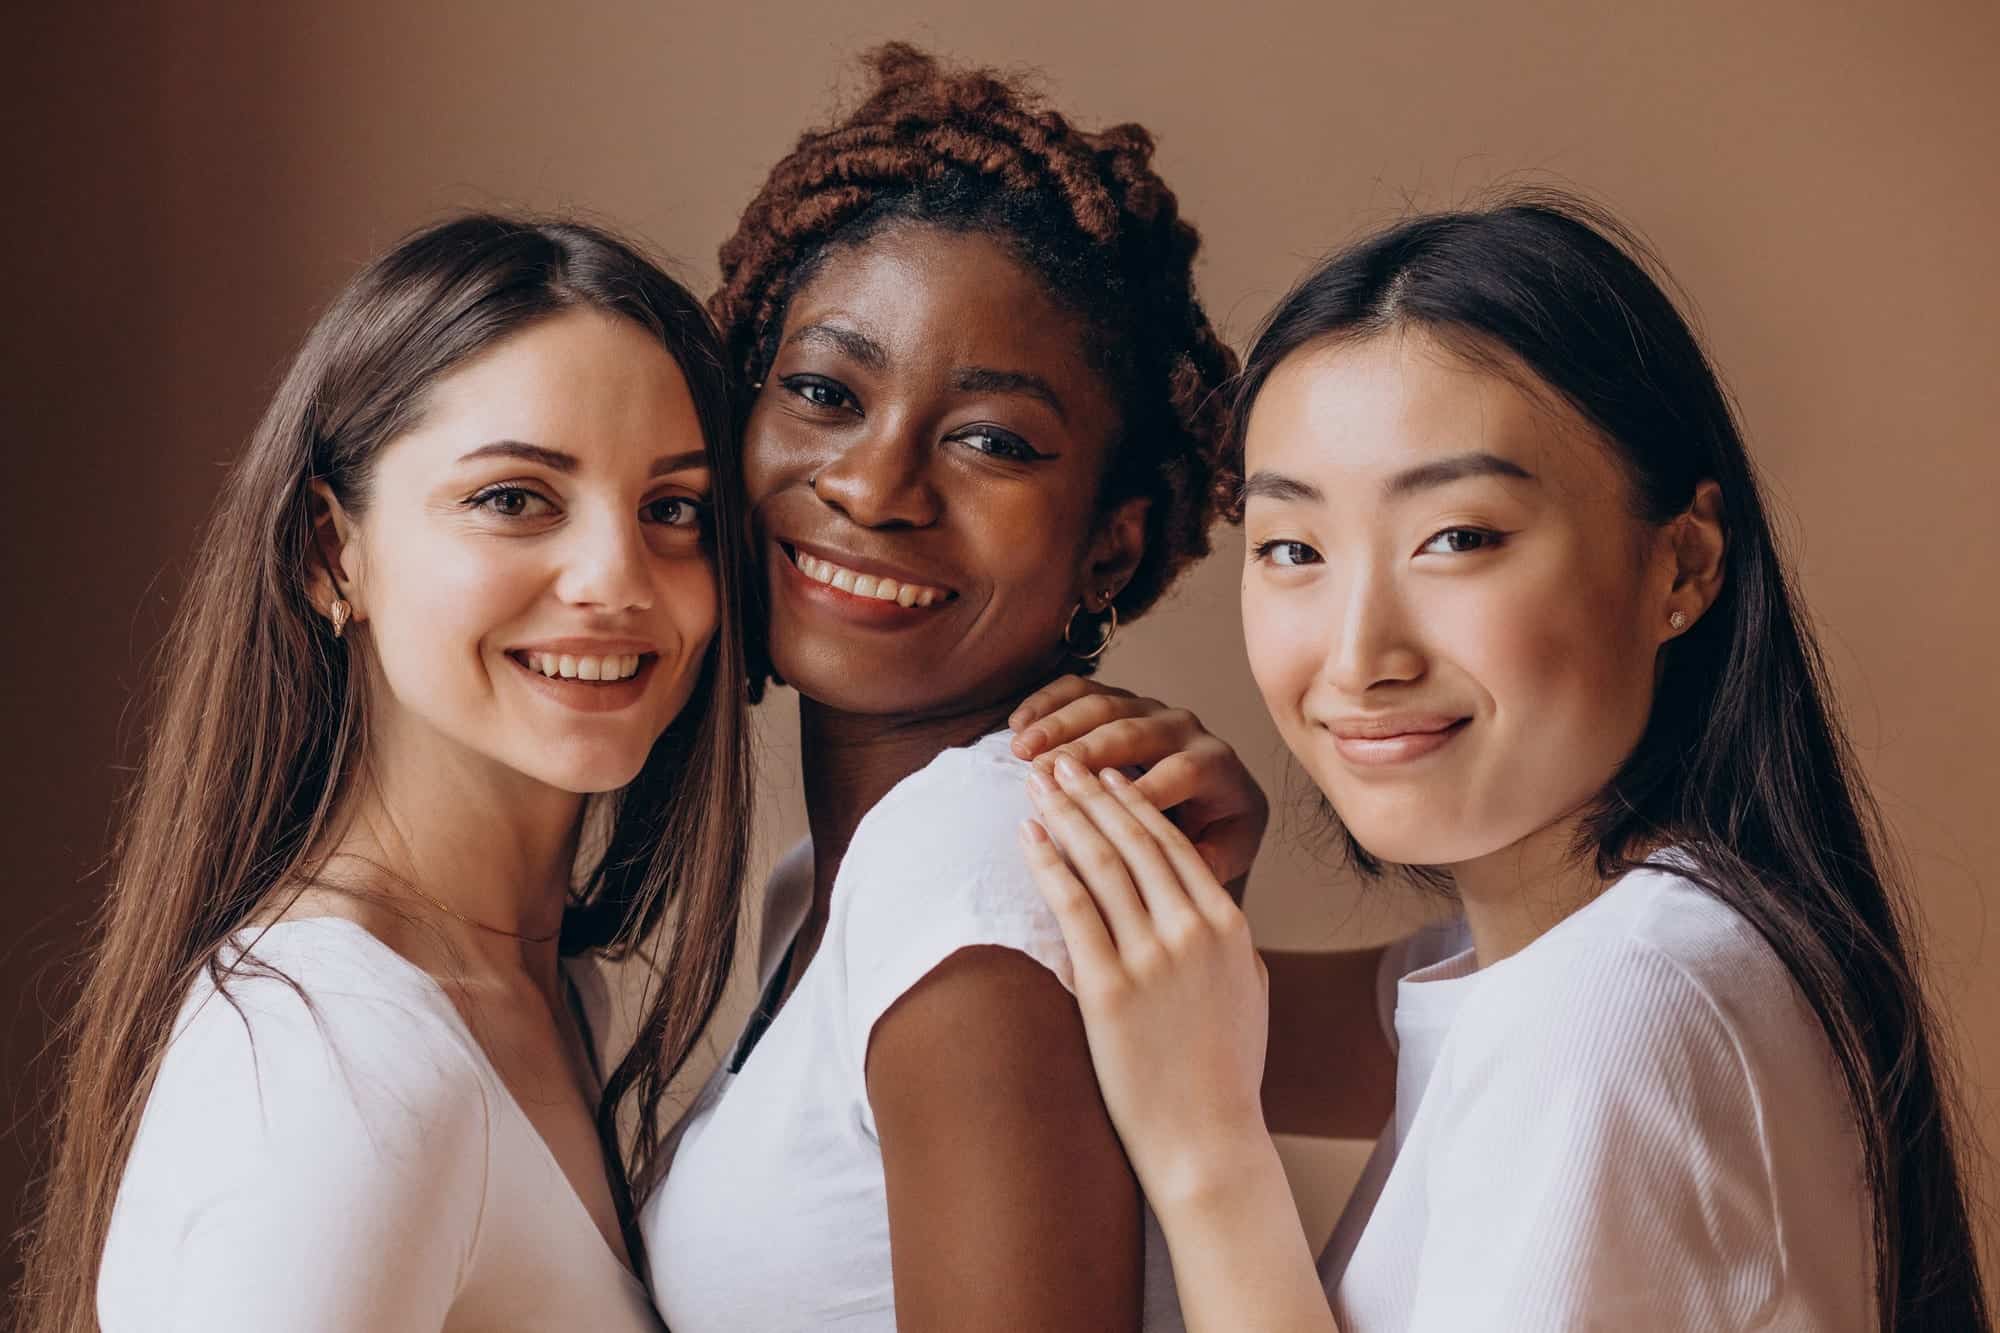 We Care for all Women: Three Multicultural Women